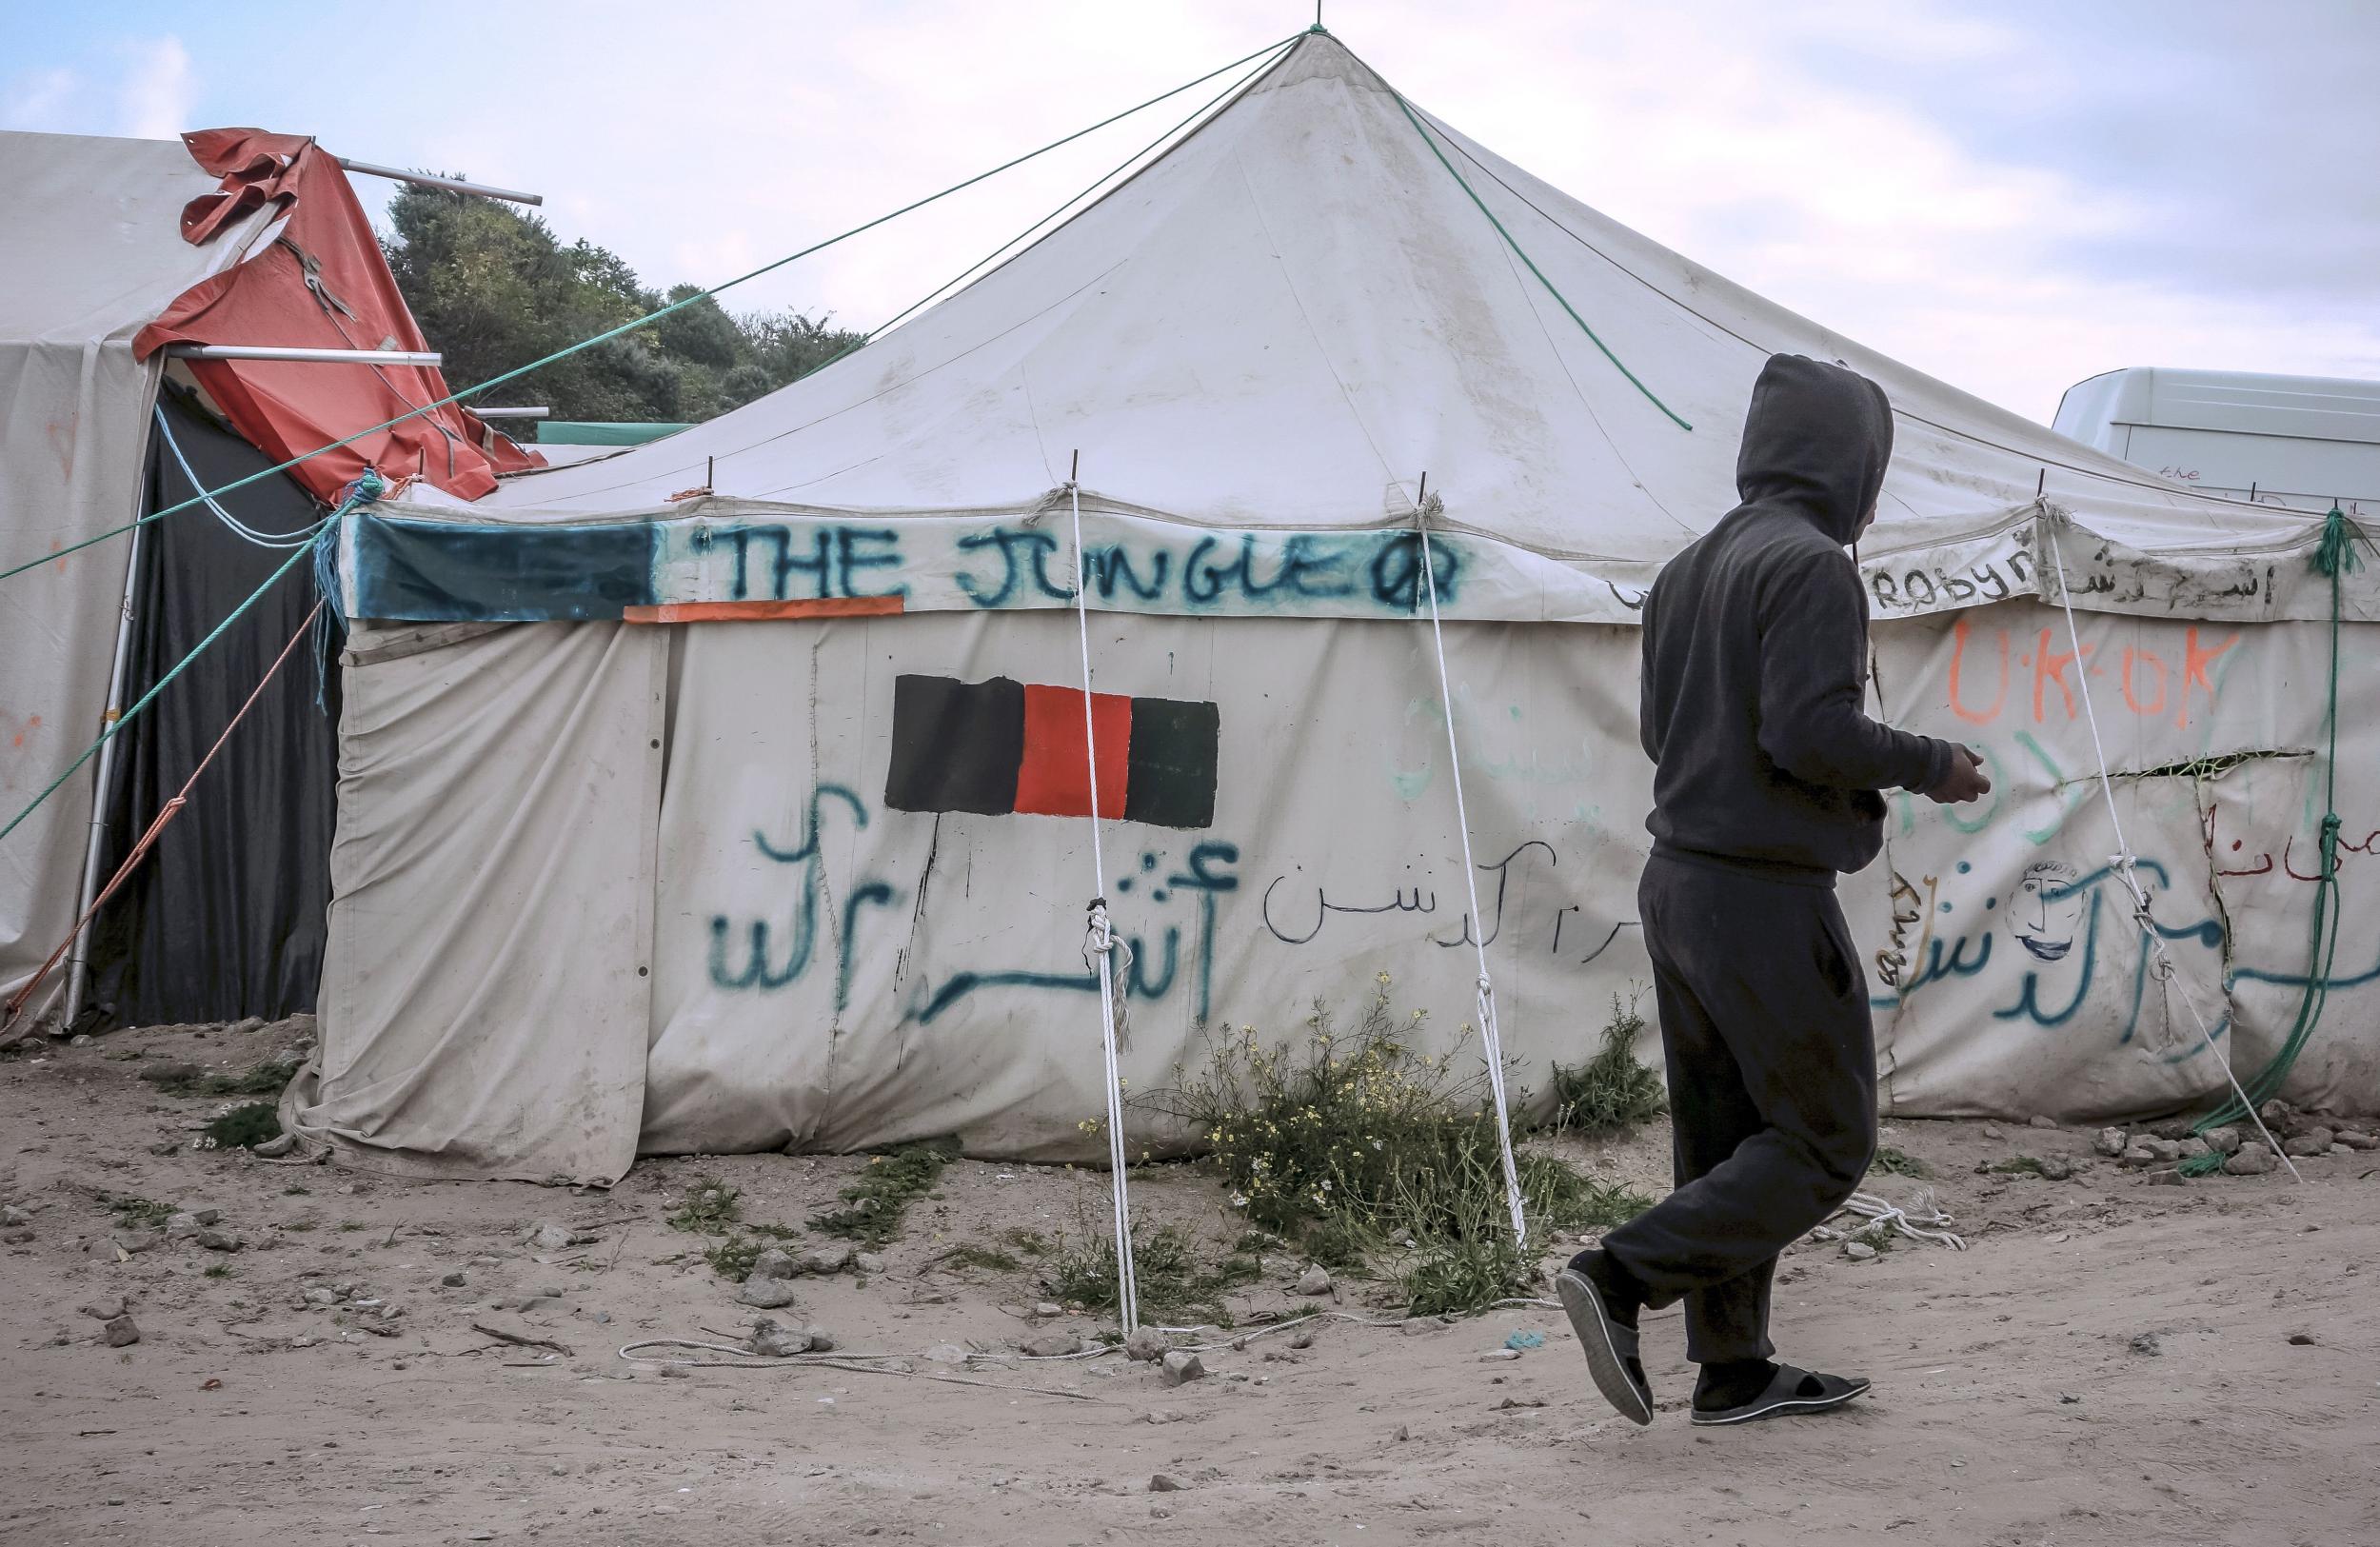 The Jungle is set to be demolished by the French authorities